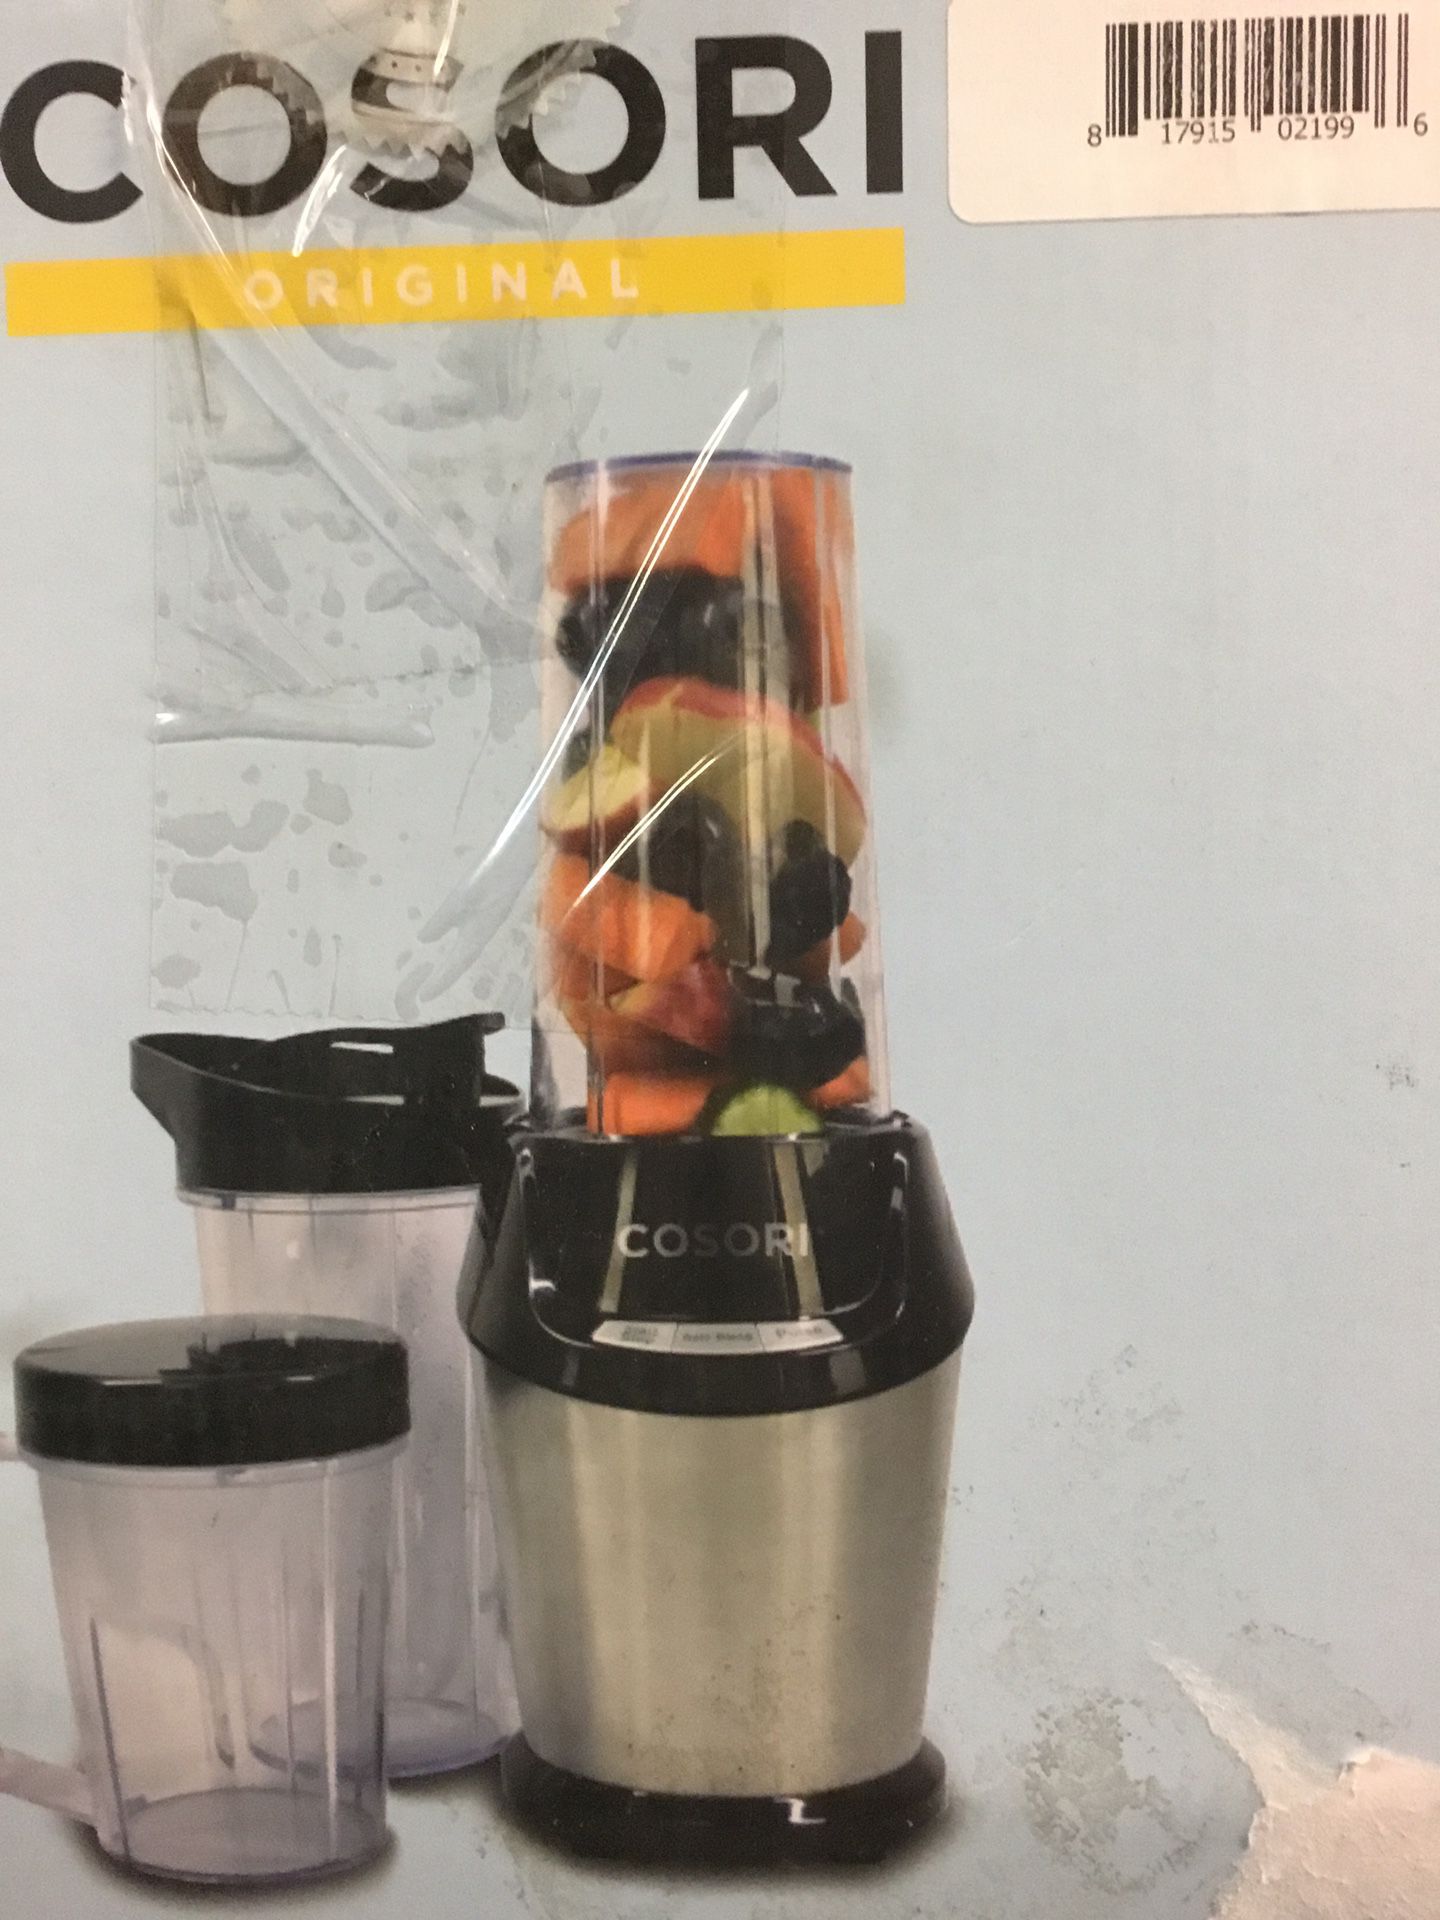 Personal blender it’s new in box